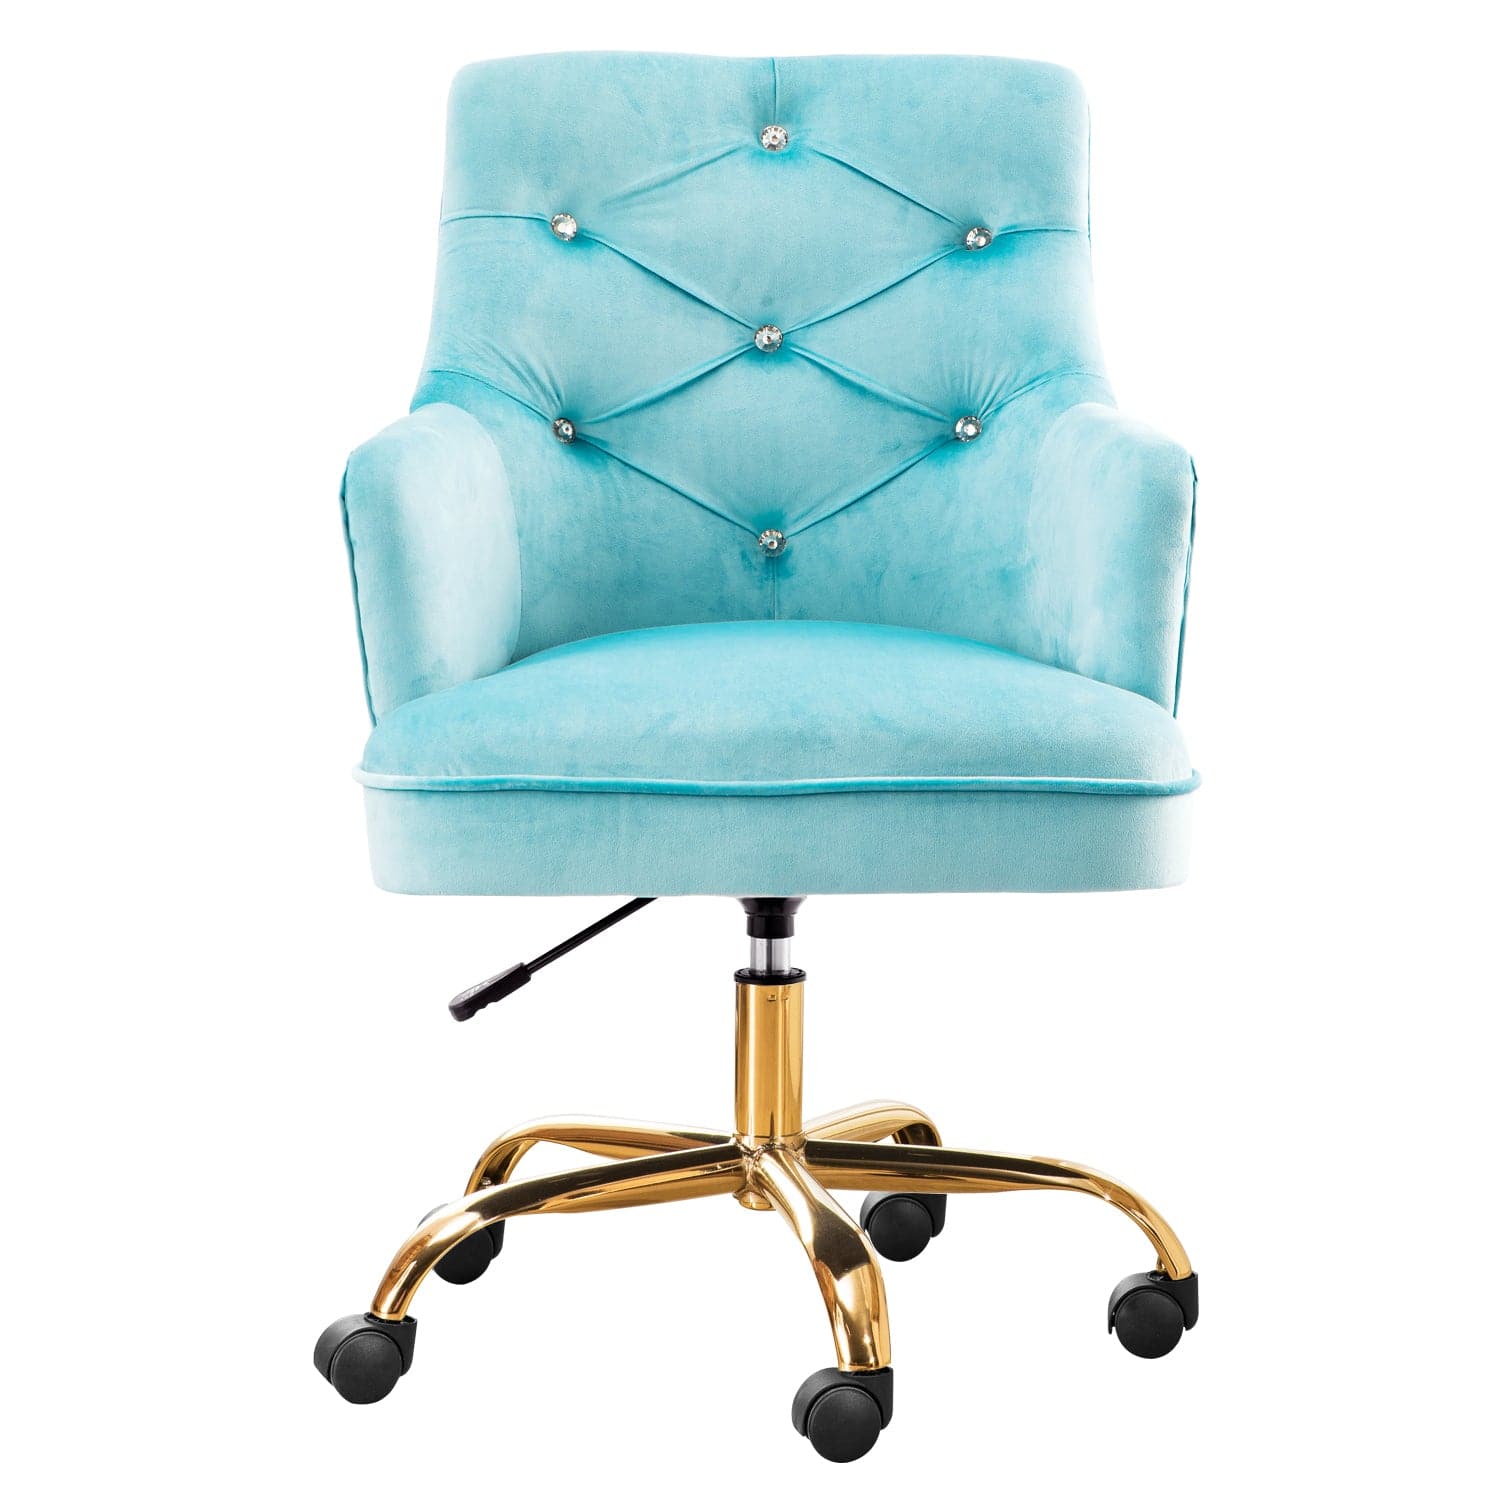 Ovios Plush Velvet Office Chair for Girl or Lady, Vanity Chair and Task Chair with Gold and Sliver Base